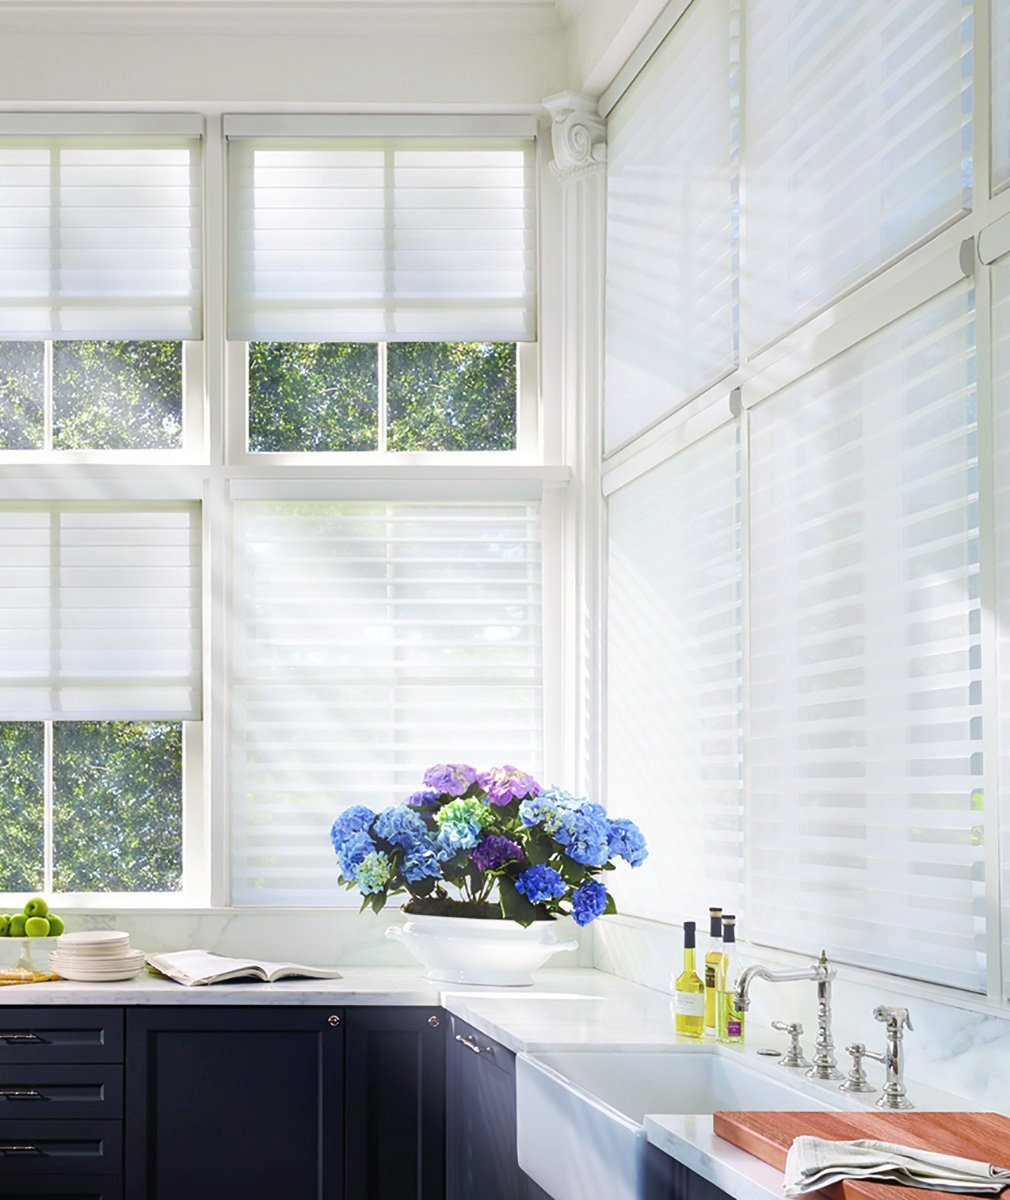 Hunter Douglas Window Treatments Silhouette Kitchen. Available at JC Licht in Chicago, IL